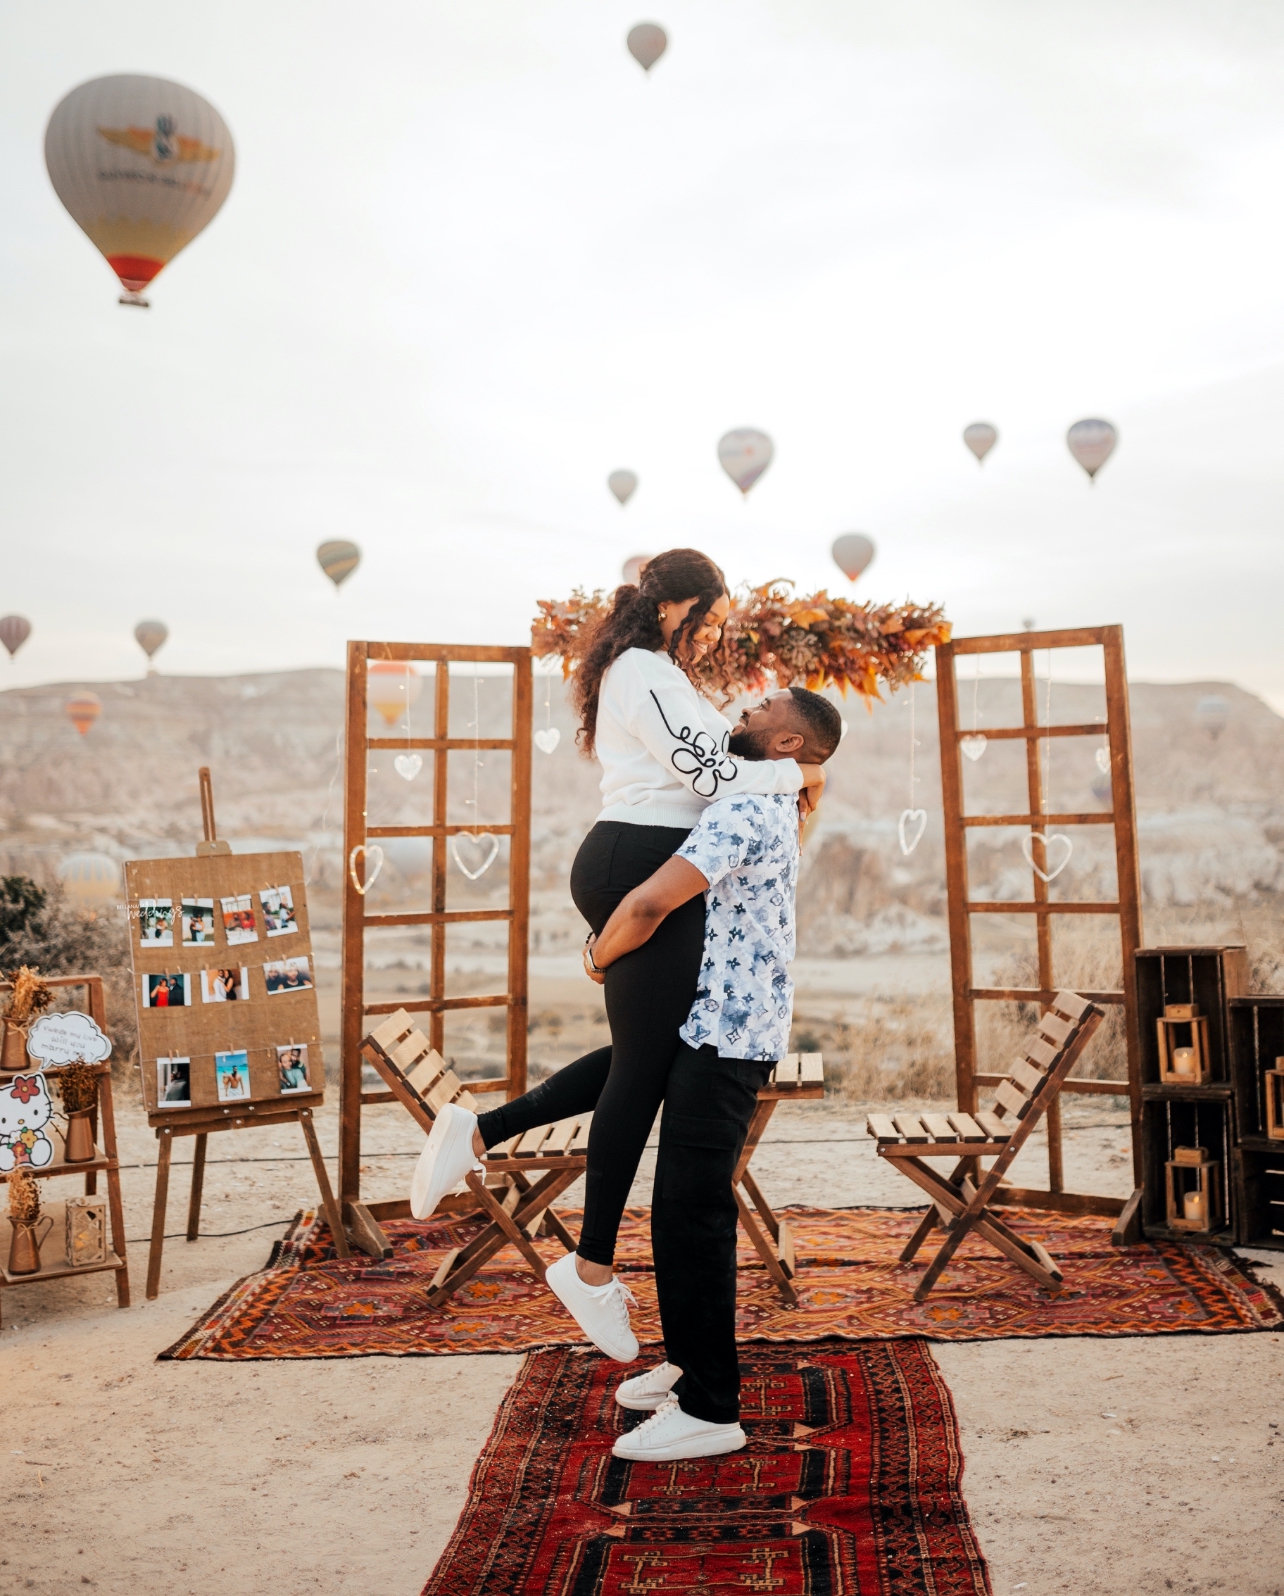 Vwede and Samuel’s Romantic #BNBling in Cappadocia Was All Shades of Candy!